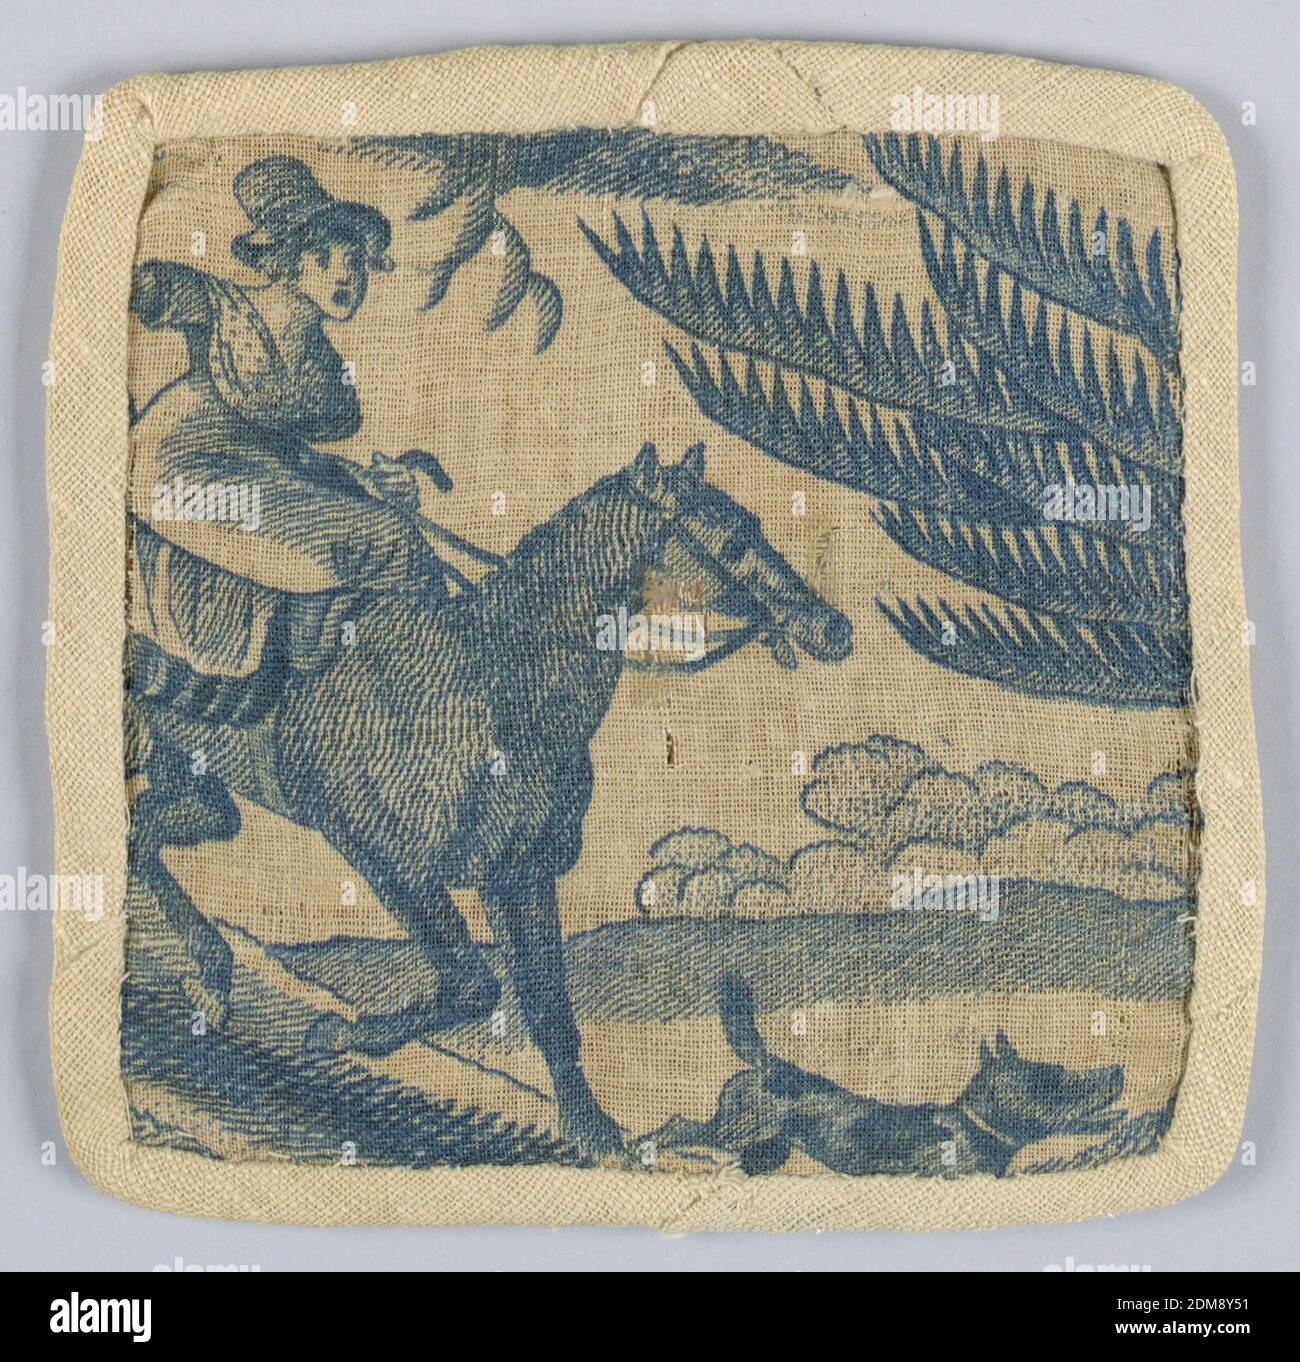 Fragment, Medium: cotton Technique: copperplate printed, Portion of a larger pattern, showing a woman riding downhill from the left on horseback, with a dog riding ahead., England, 1765–1775, printed, dyed & painted textiles, Fragment Stock Photo